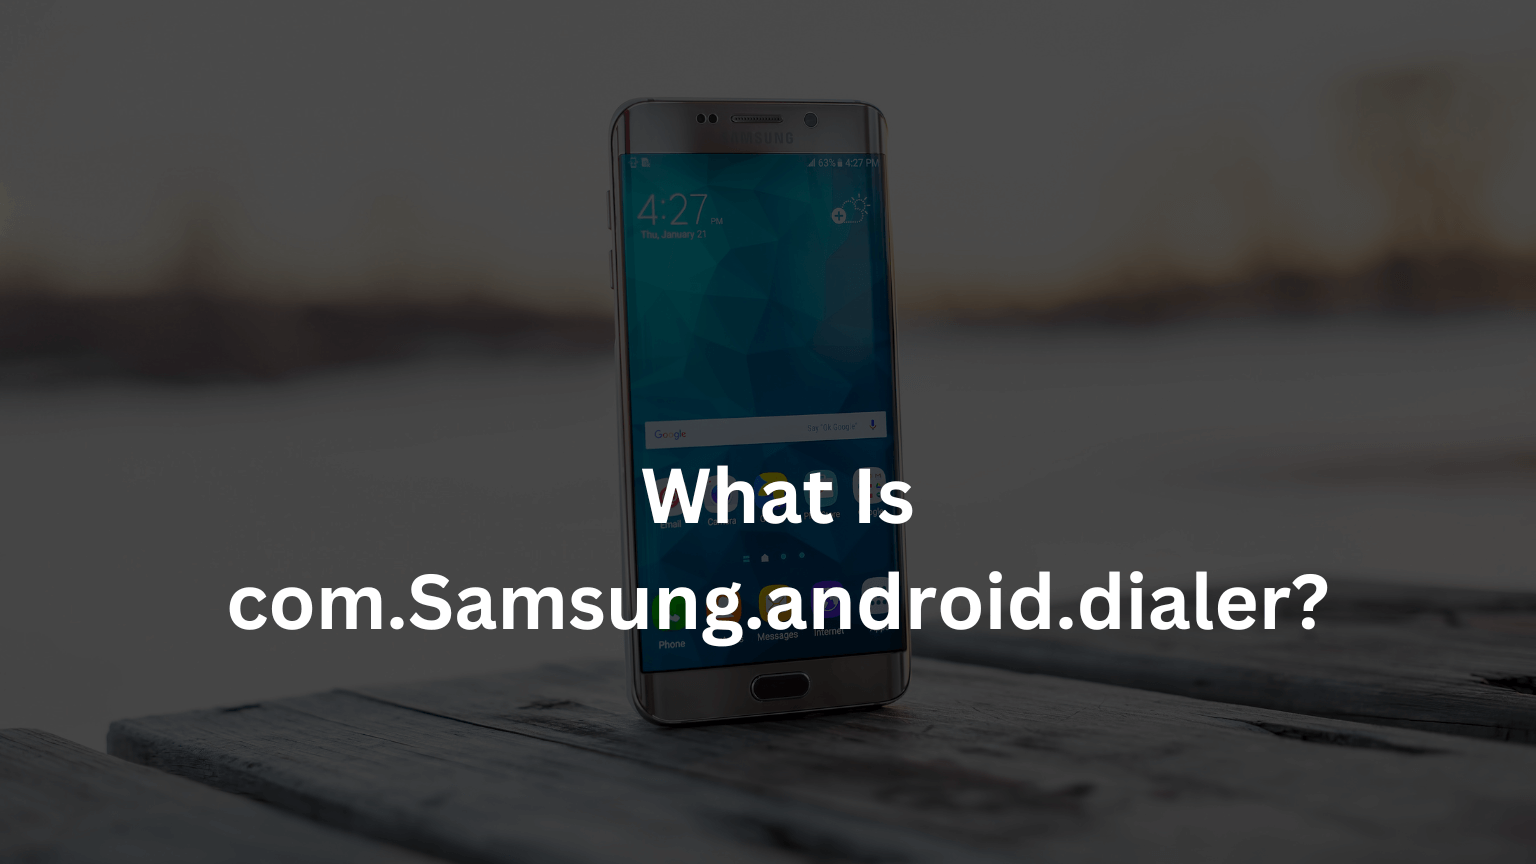 What Is com.Samsung.android.dialer?